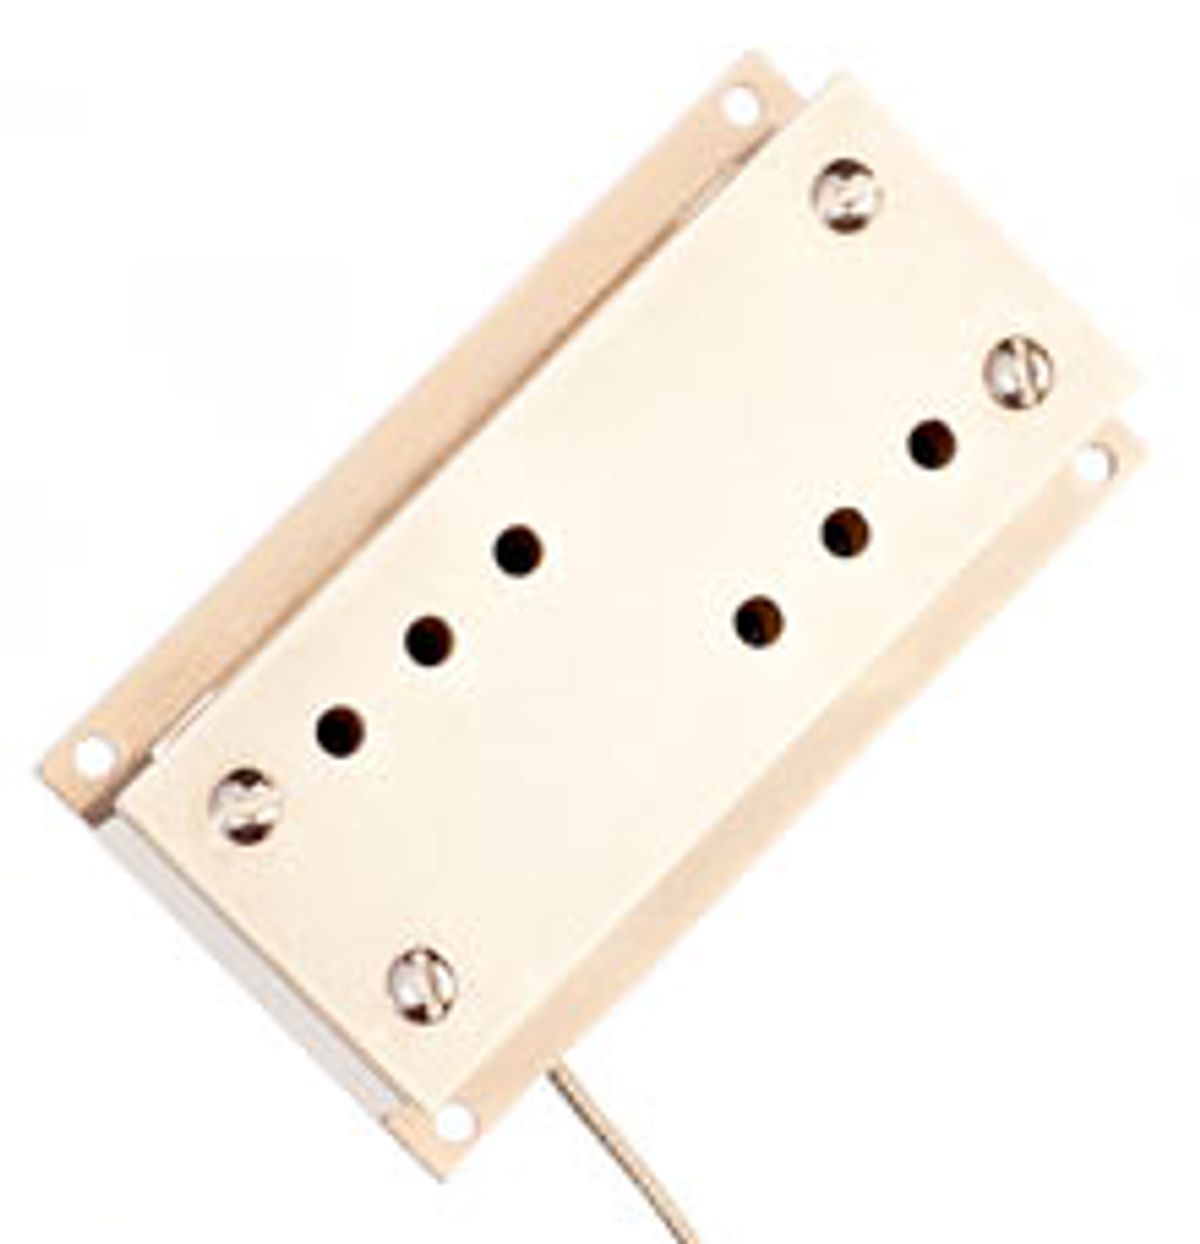 Lollar Pickups Releases the Supro-style Steel Guitar Pickup